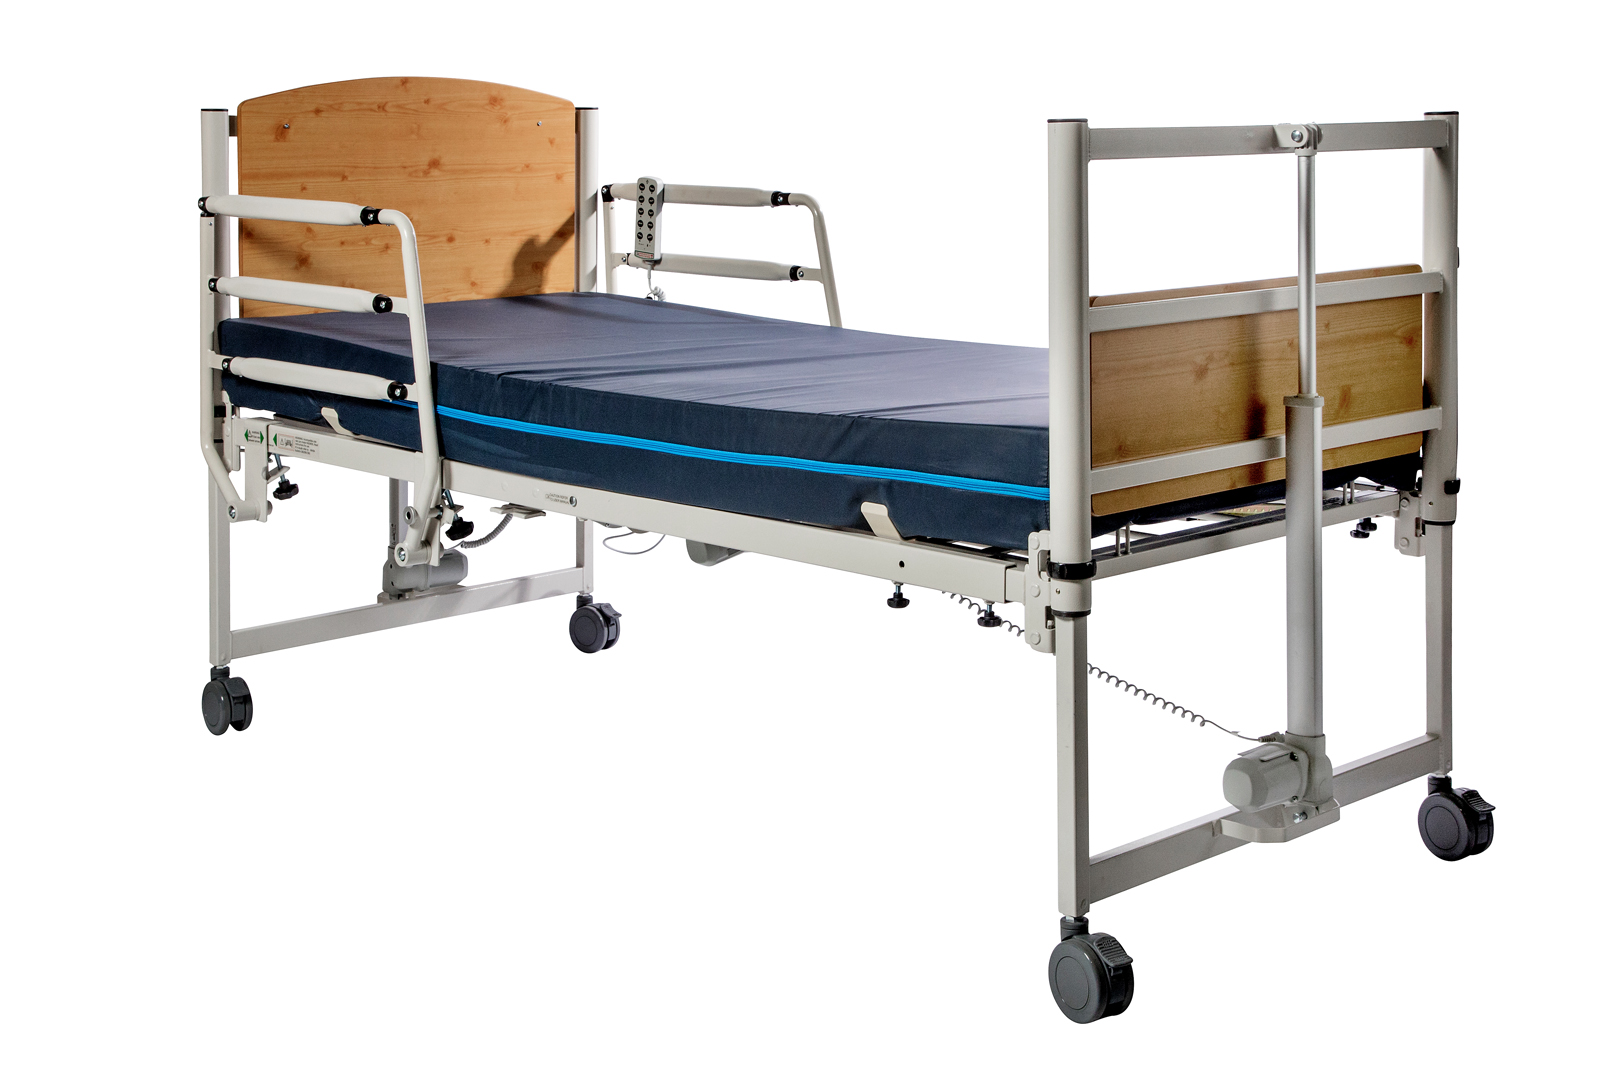 8199 Home Care Bed frame shown with a standard mattress.